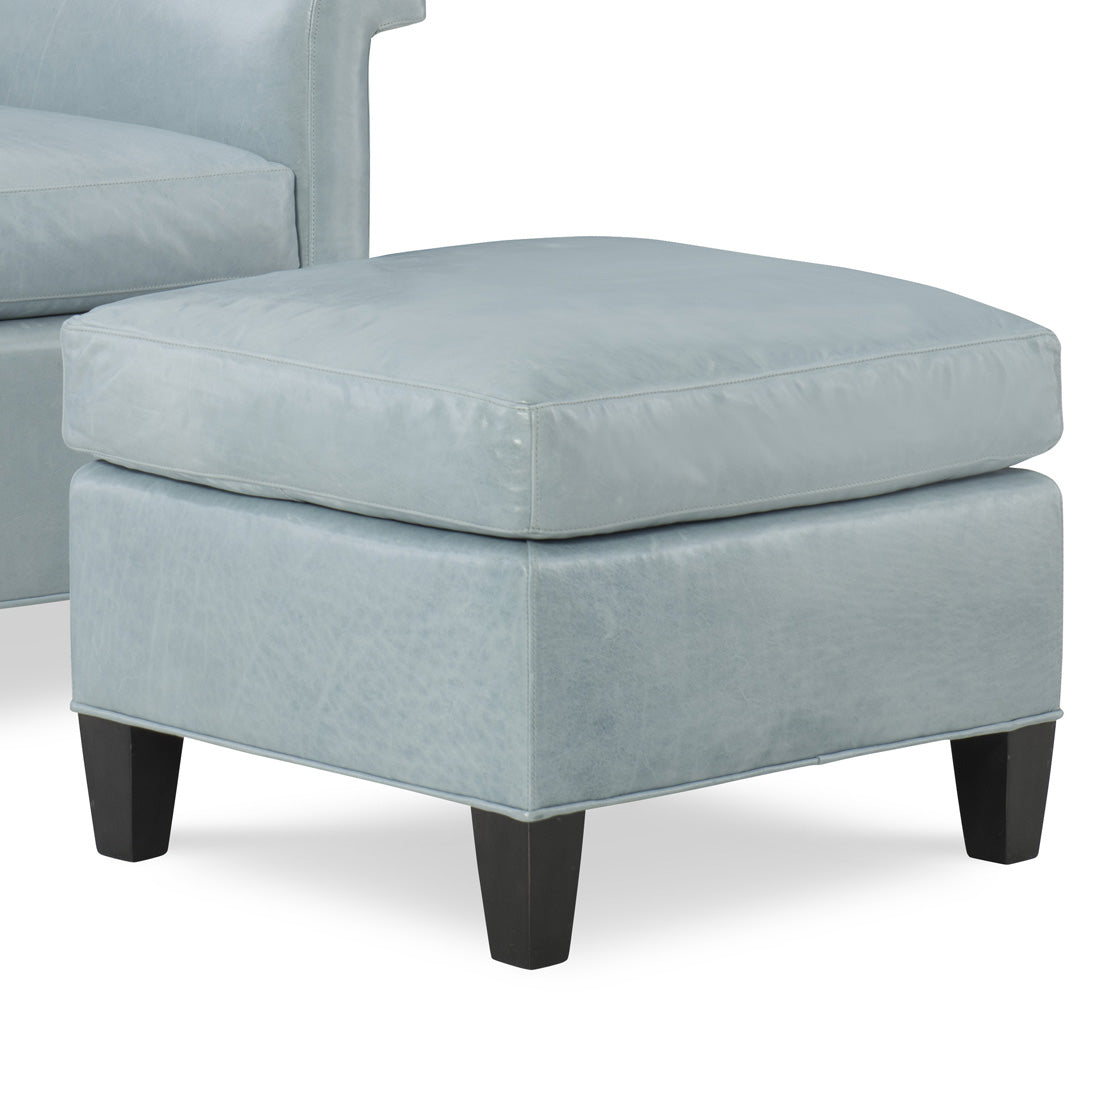 Talley Leather Ottoman by Wesley Hall shown in Mont Blanc Light Blue leather